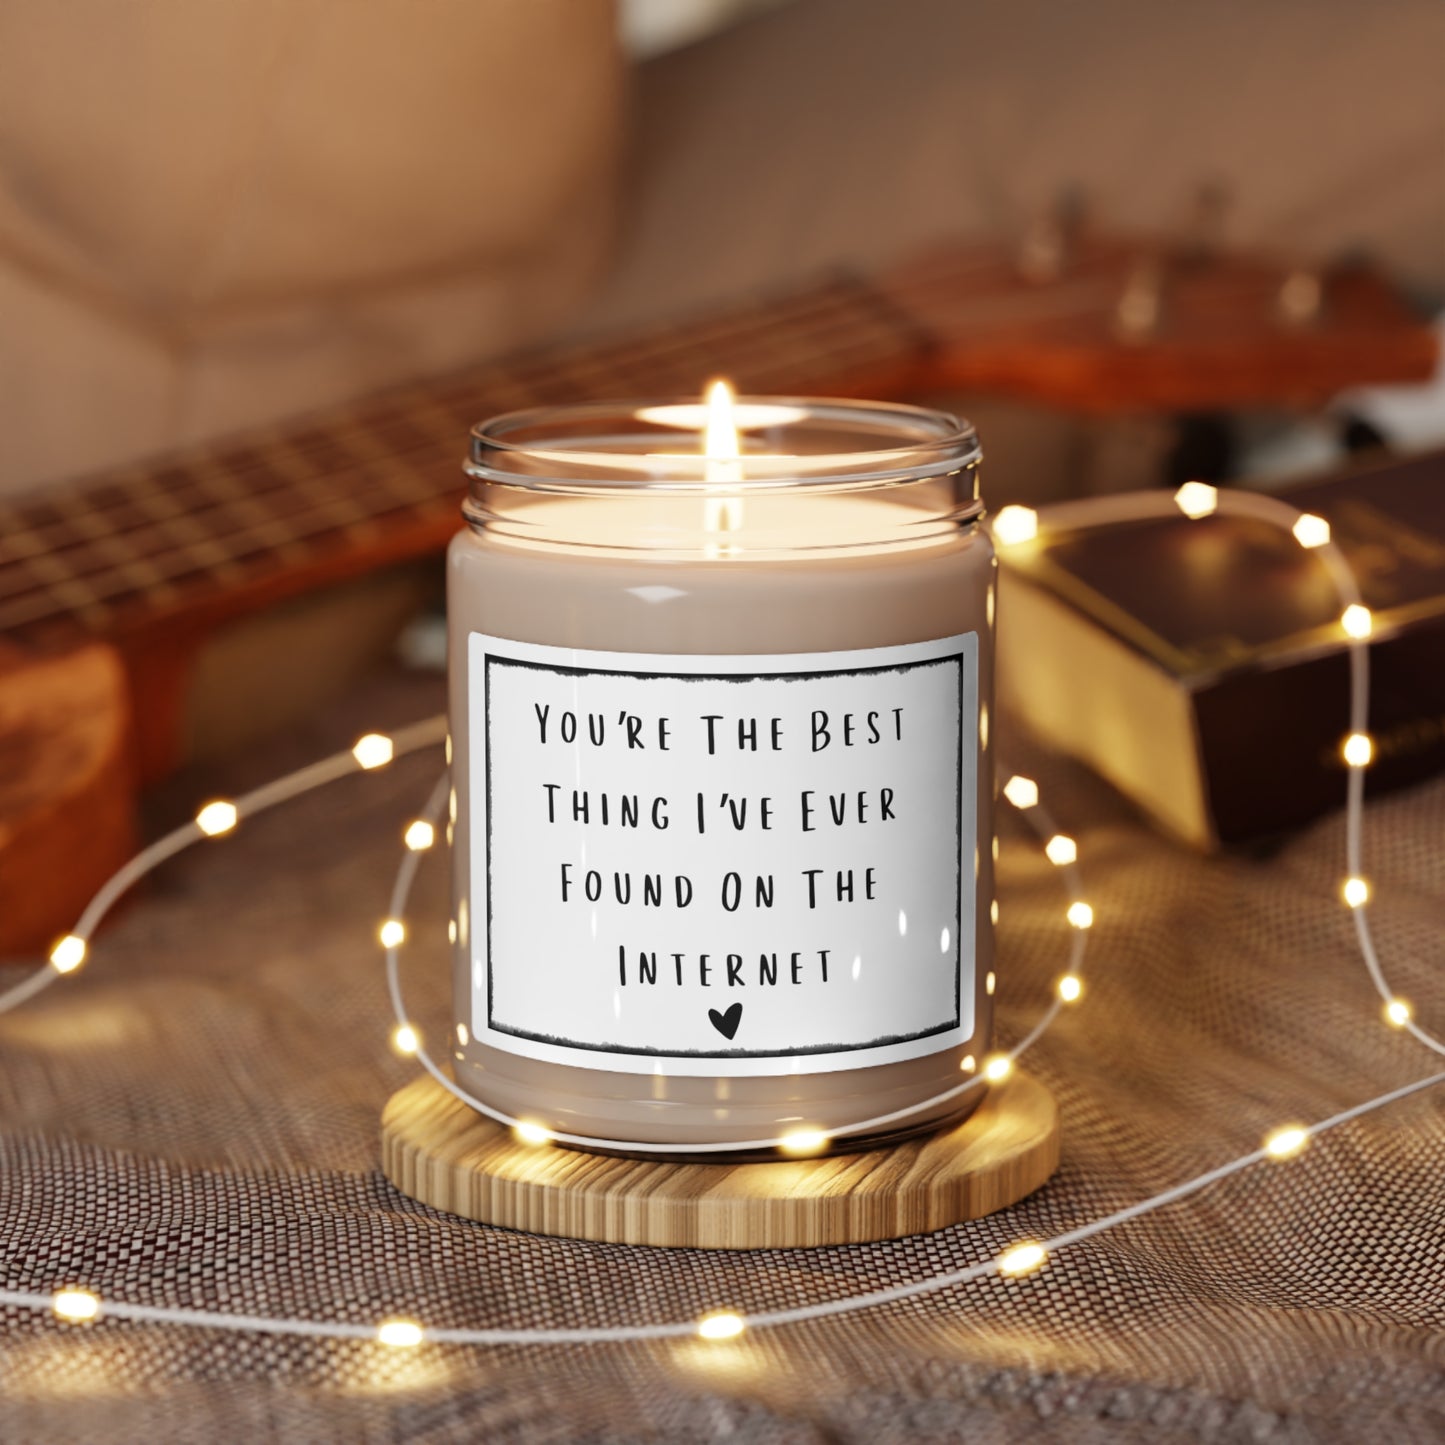 Found On Internet Scented Soy Candle, 9oz